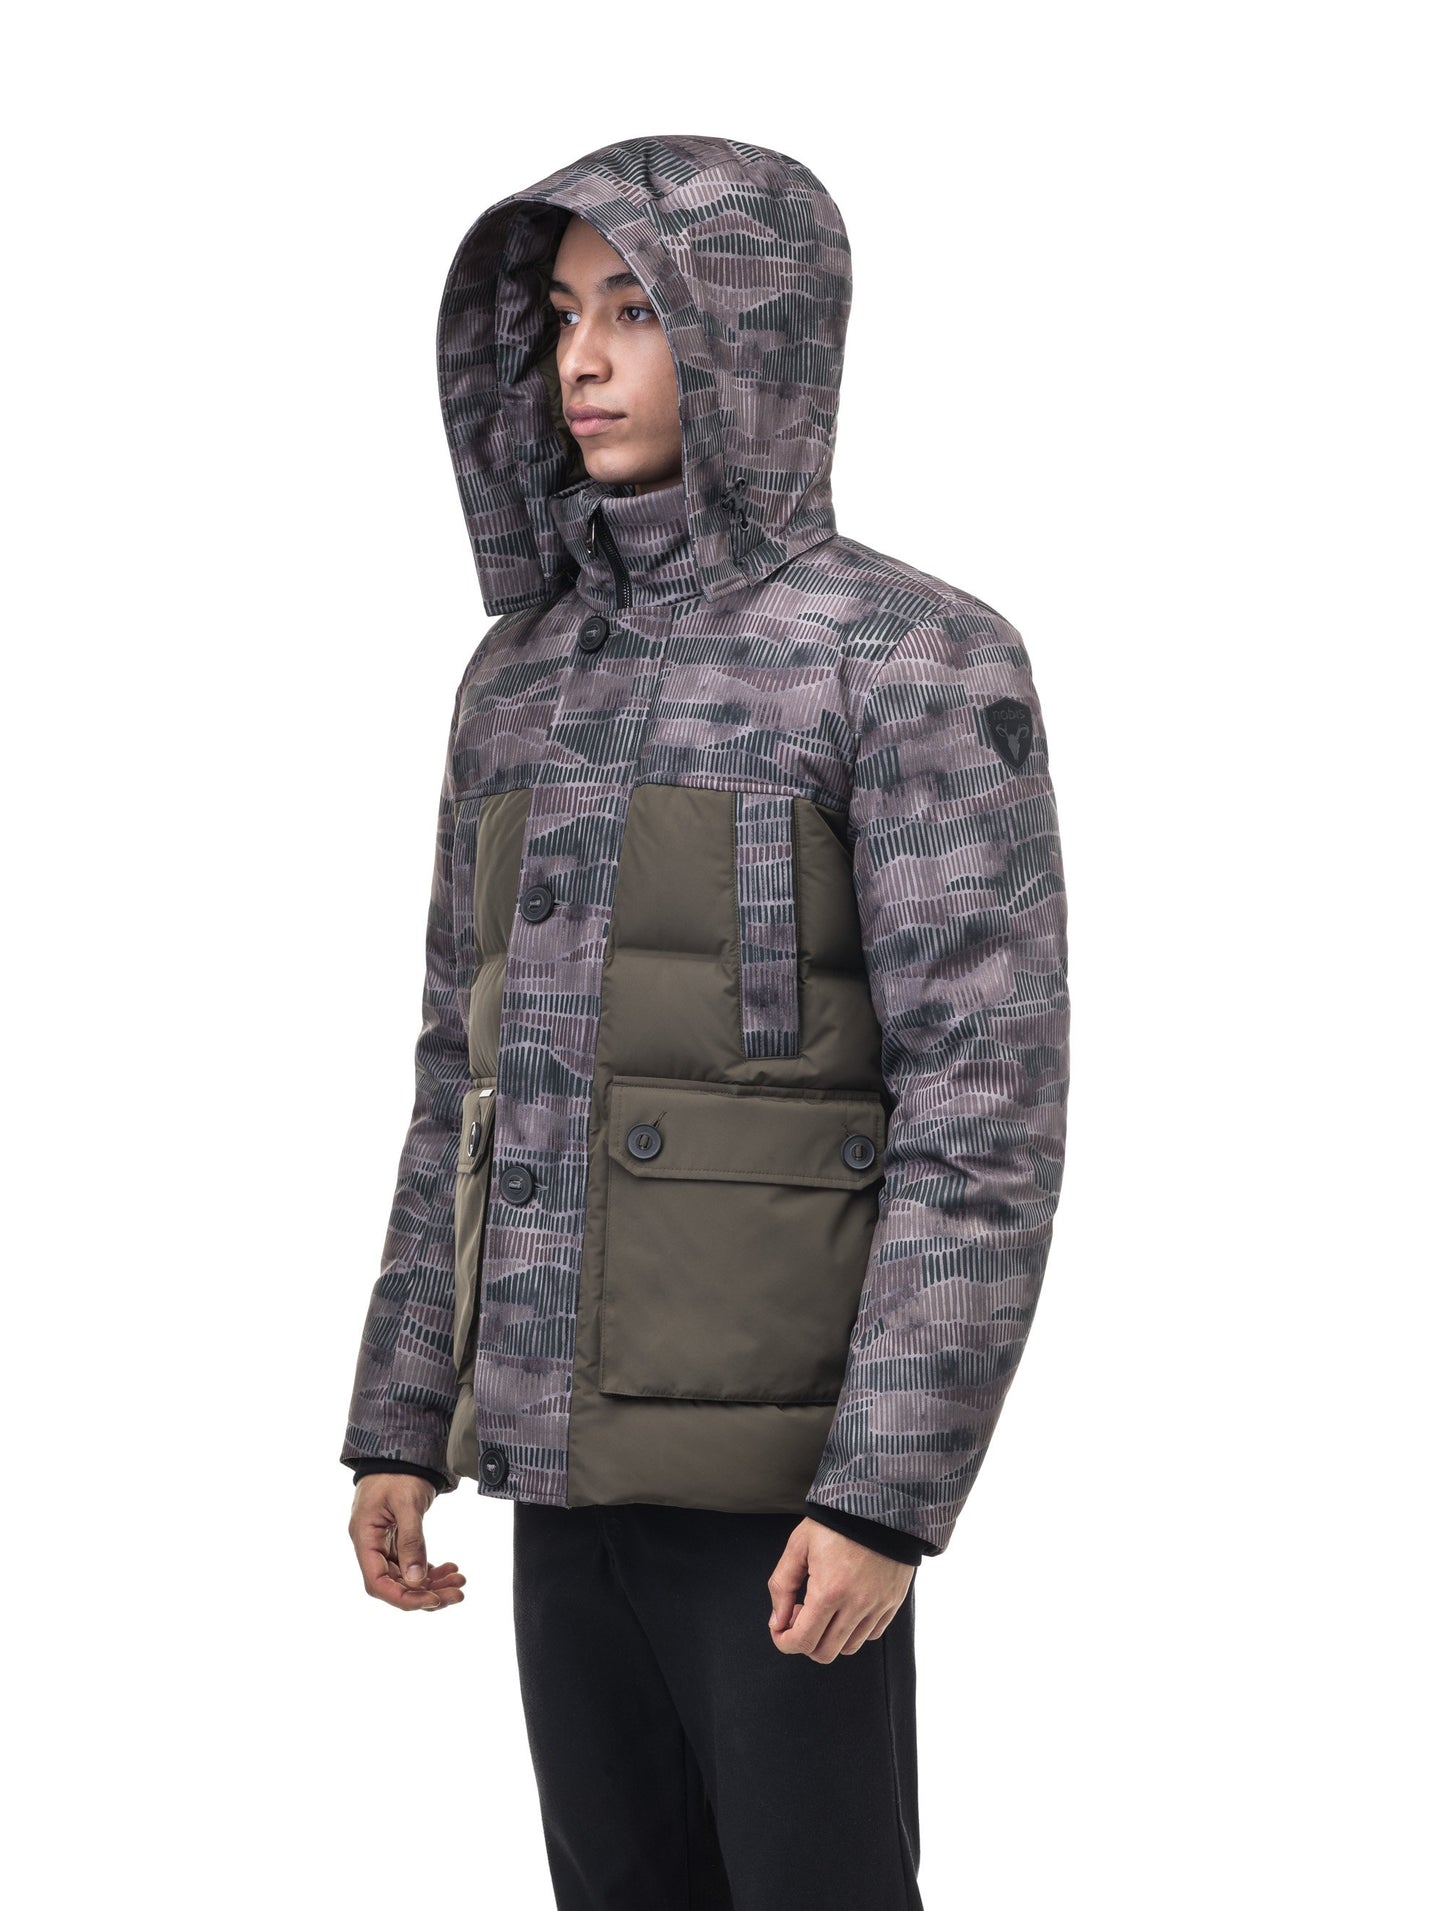 Cardinal Men's Puffer Parka in hip length, Canadian duck down insulation, removable hood, quilted body, and two-way front zipper, in Dark Sandstorm